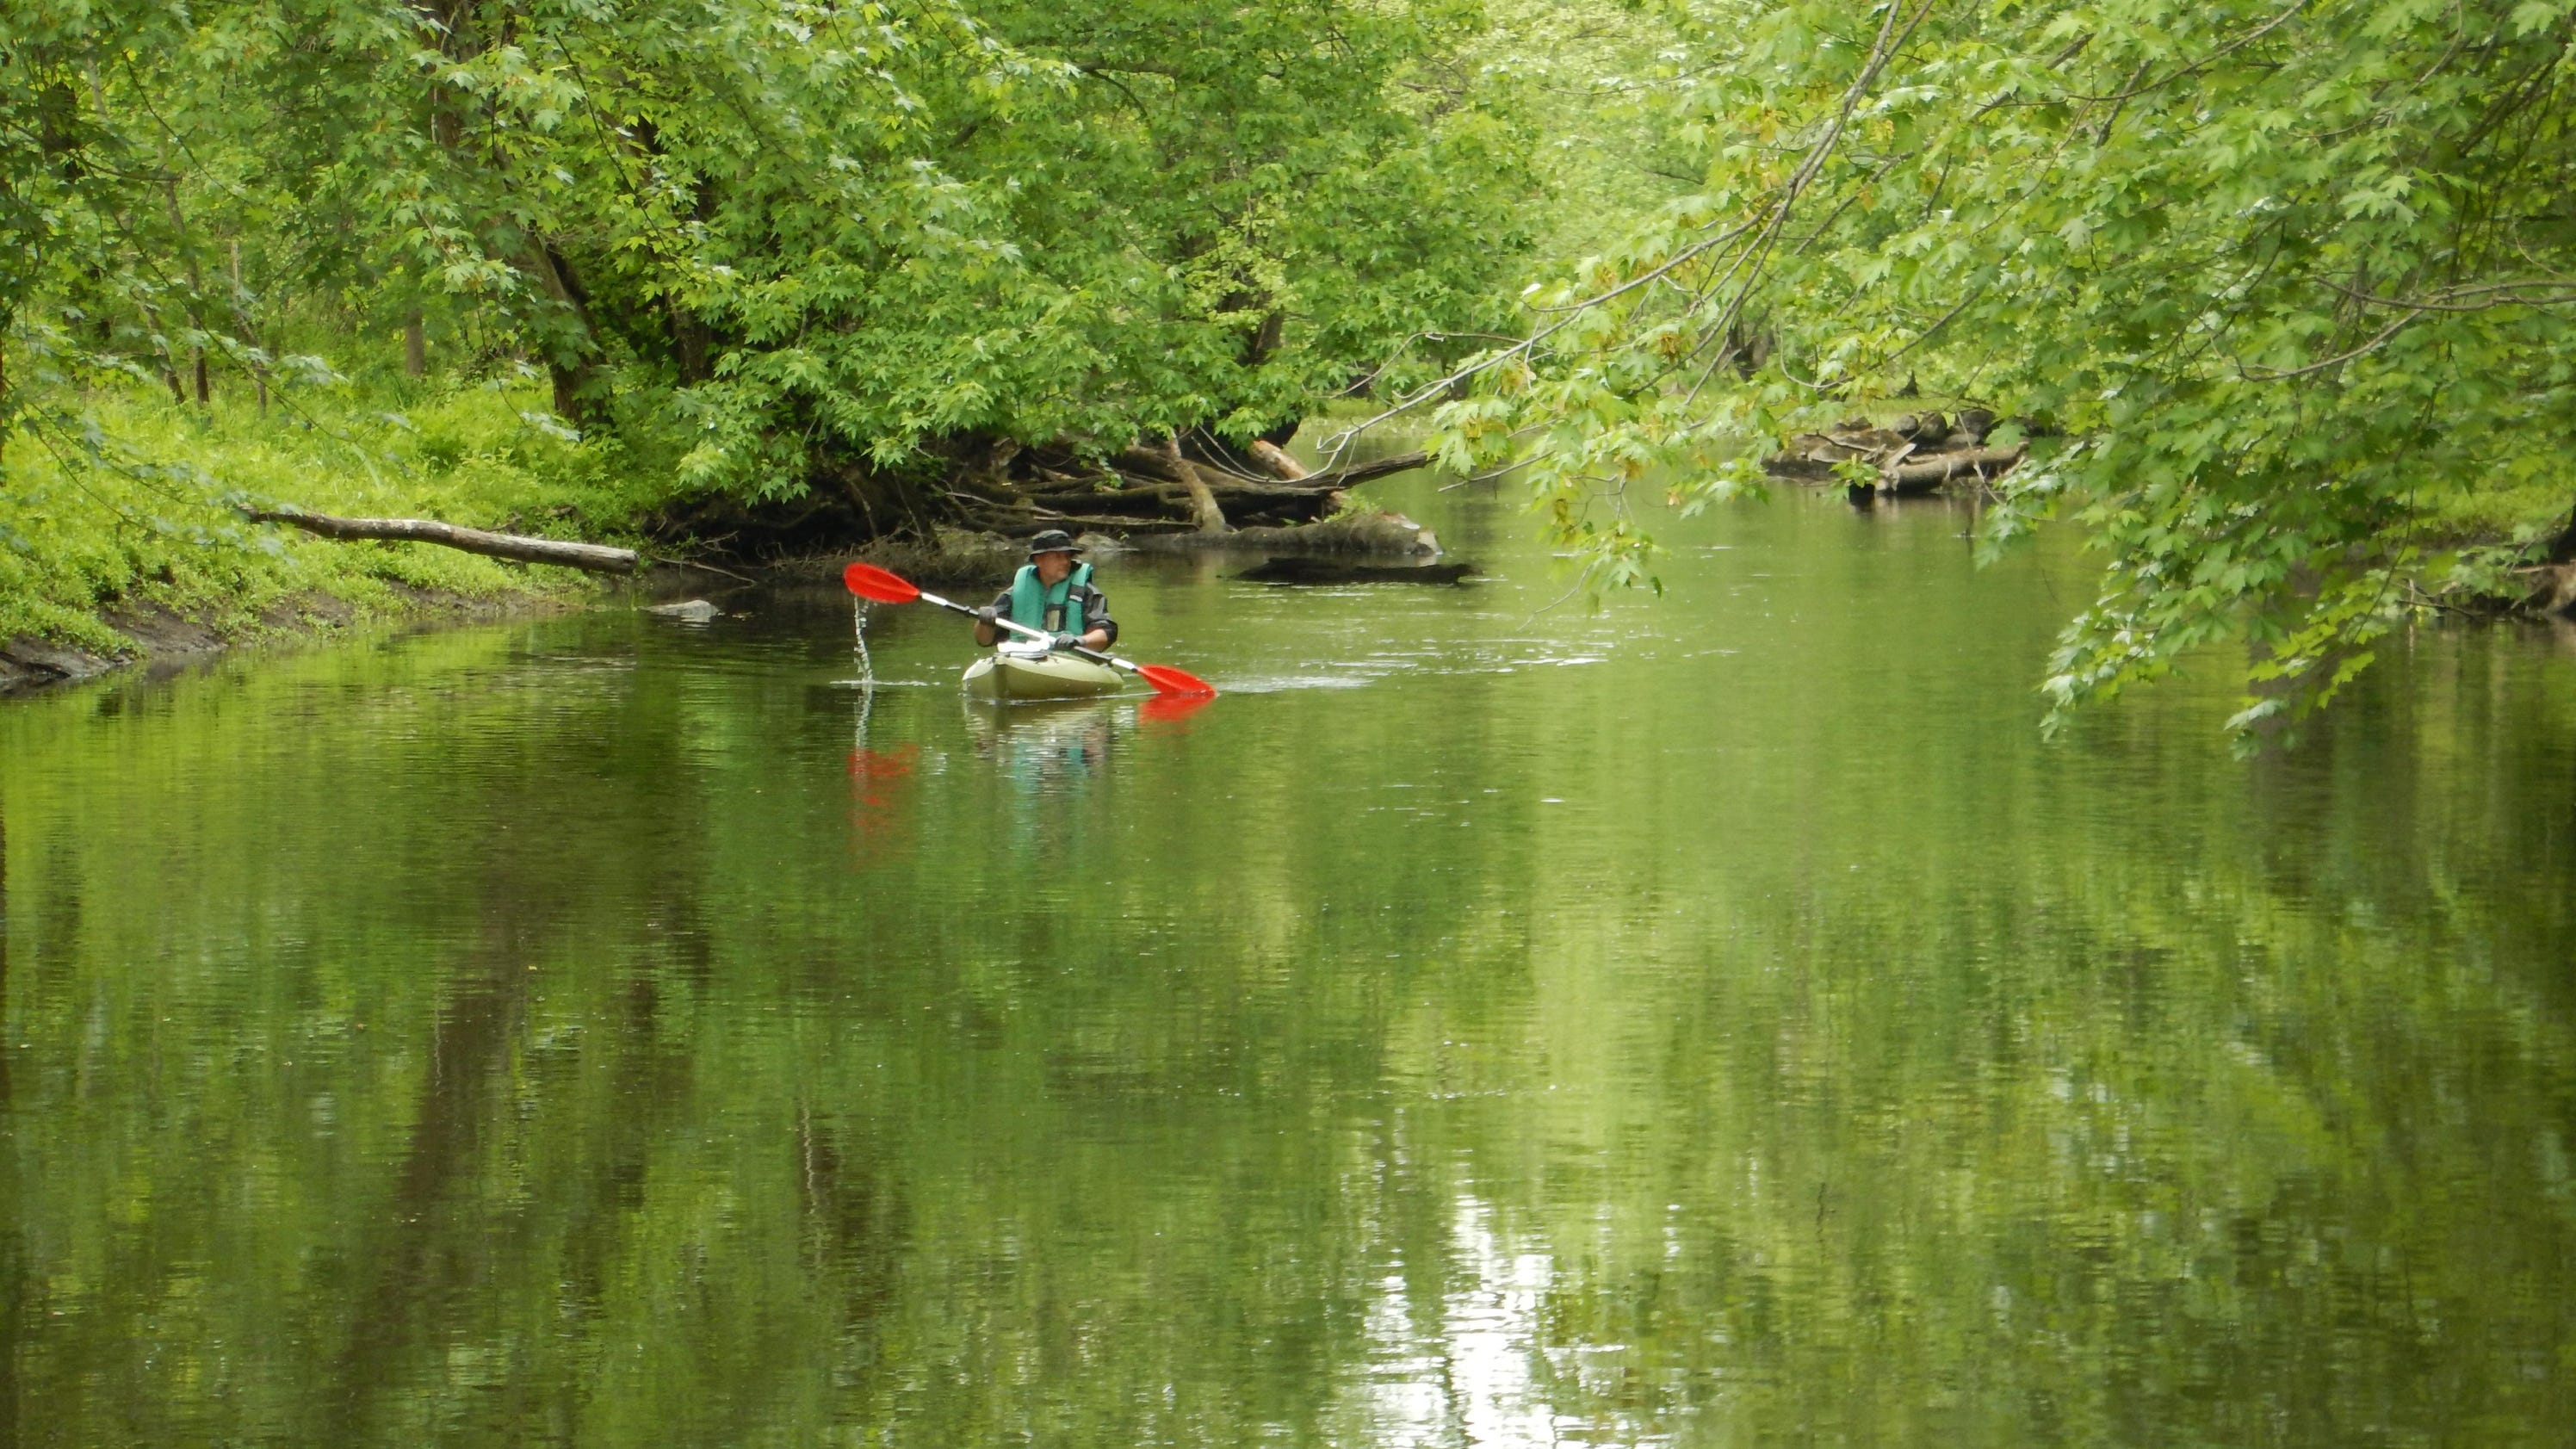 Experience the Great Swamp from a kayak